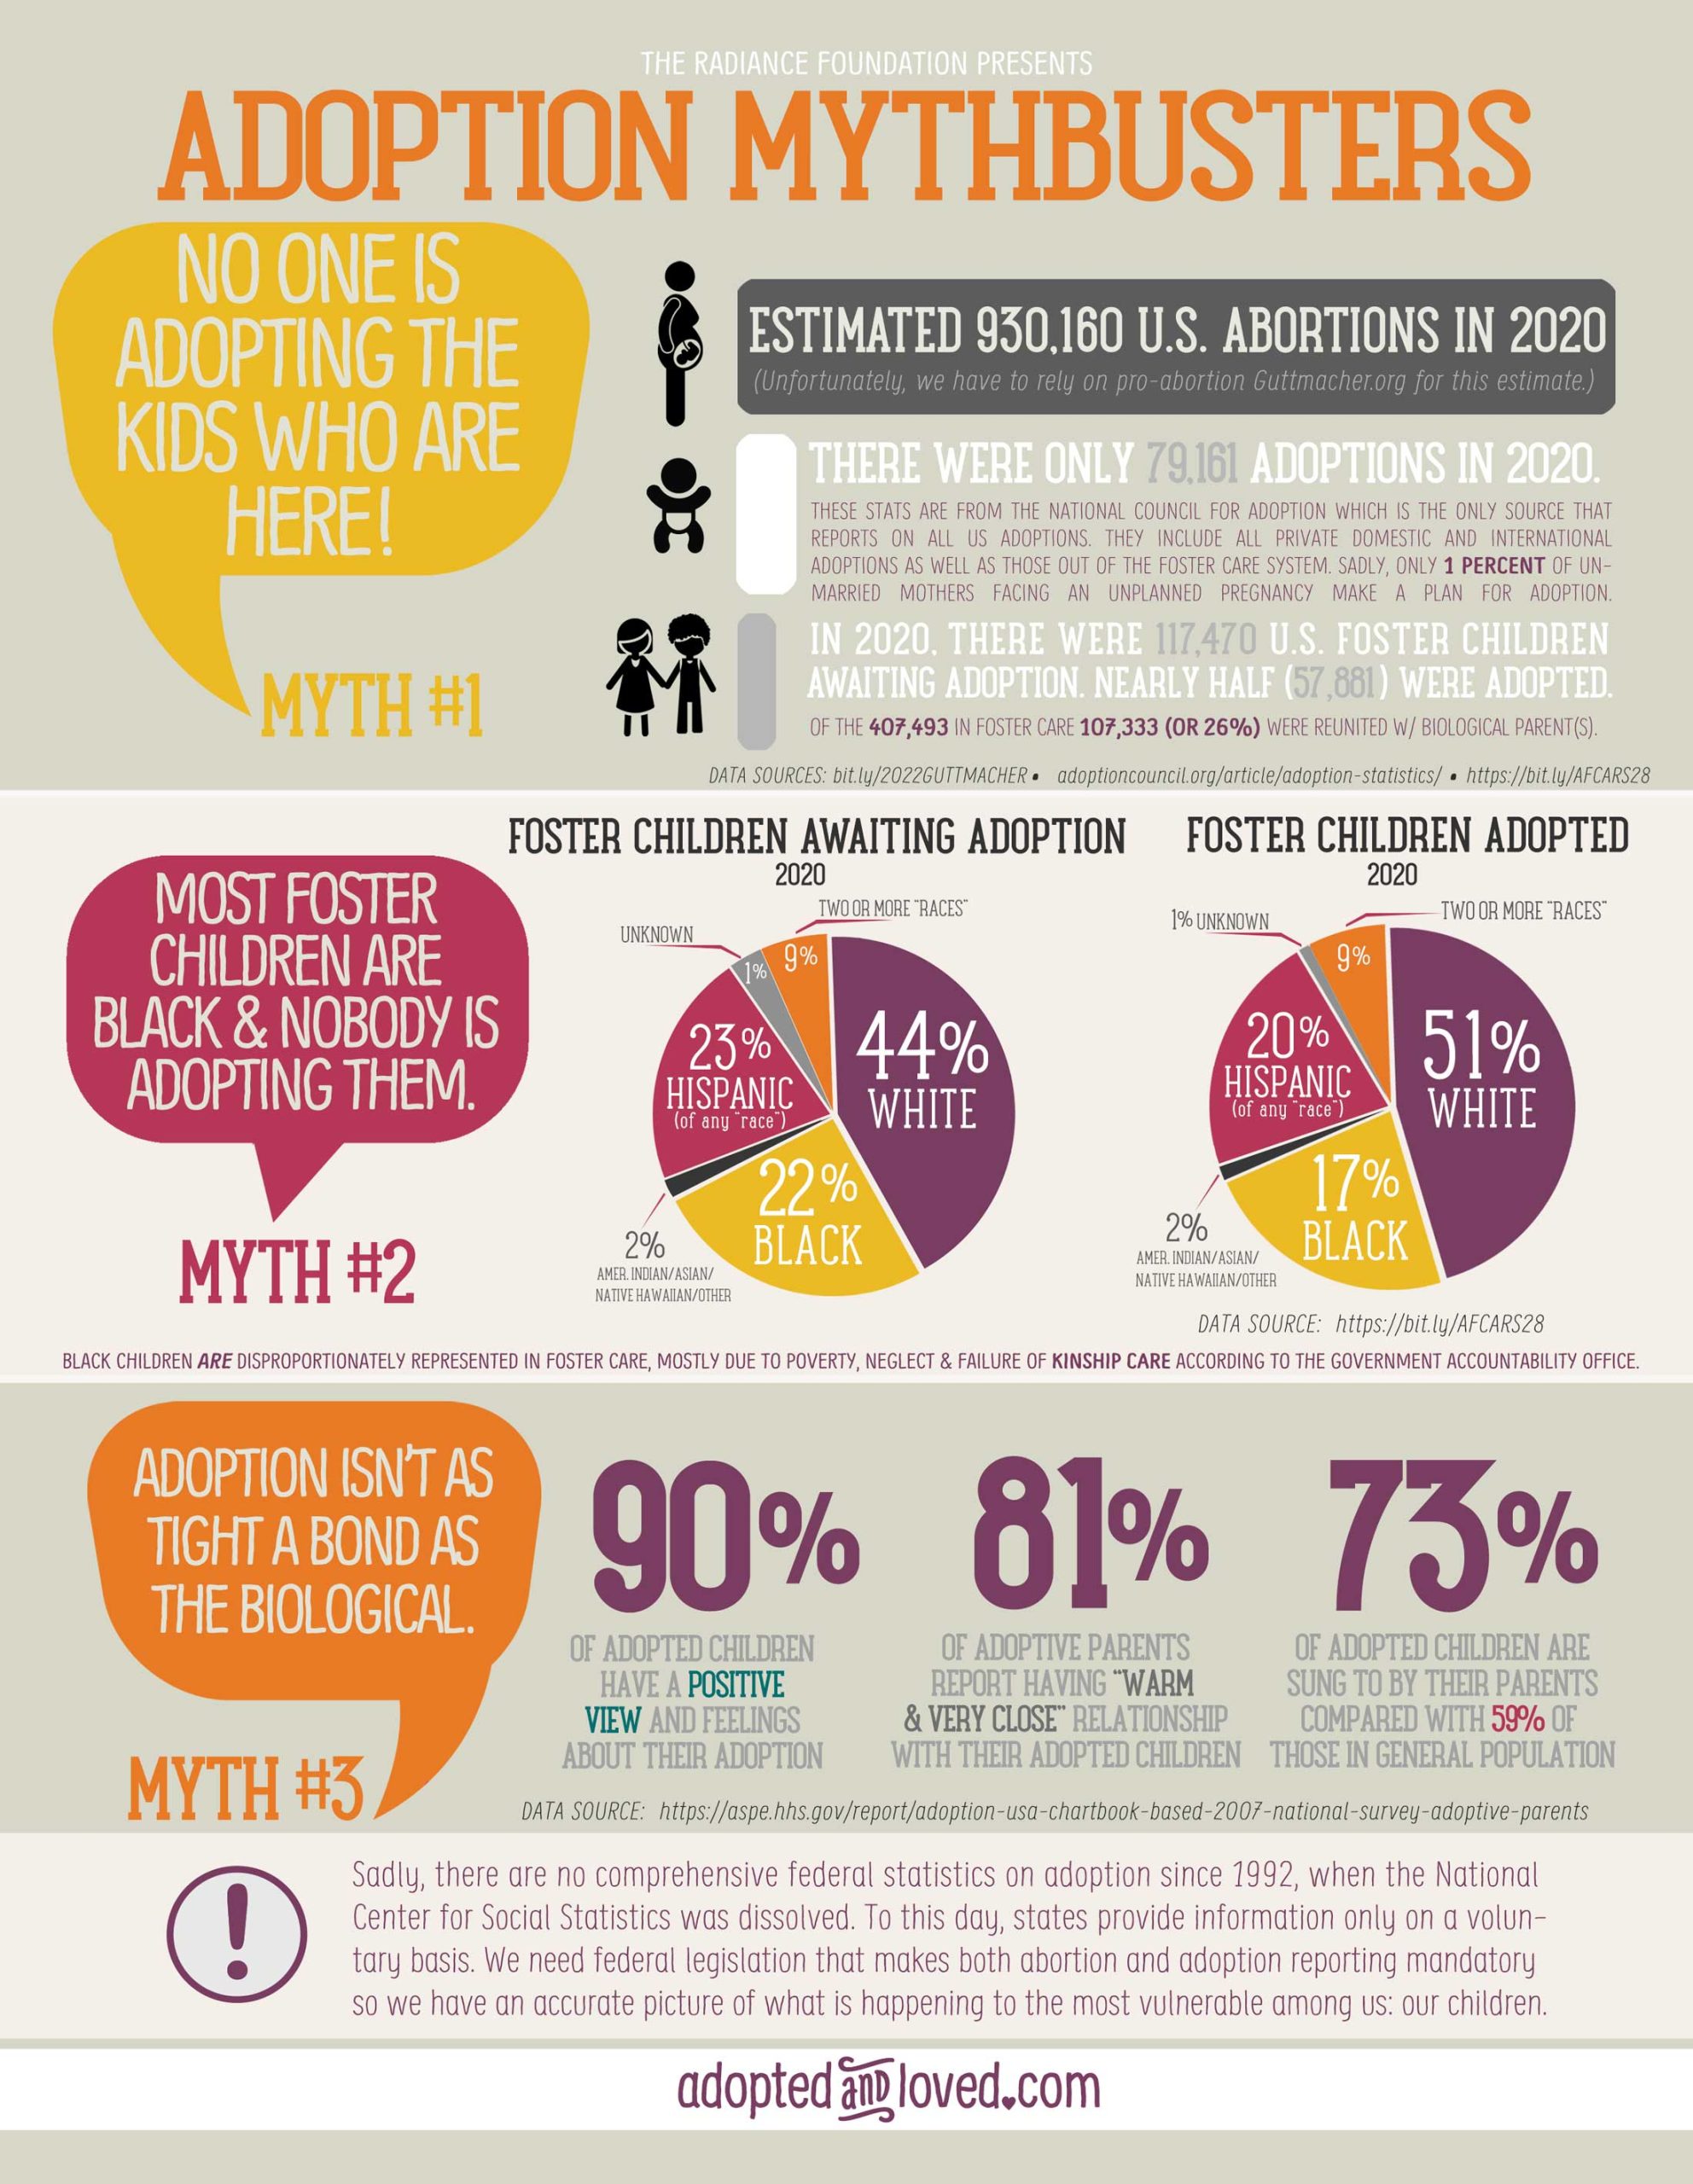 "Adoption Mythbusters" by The Radiance Foundation